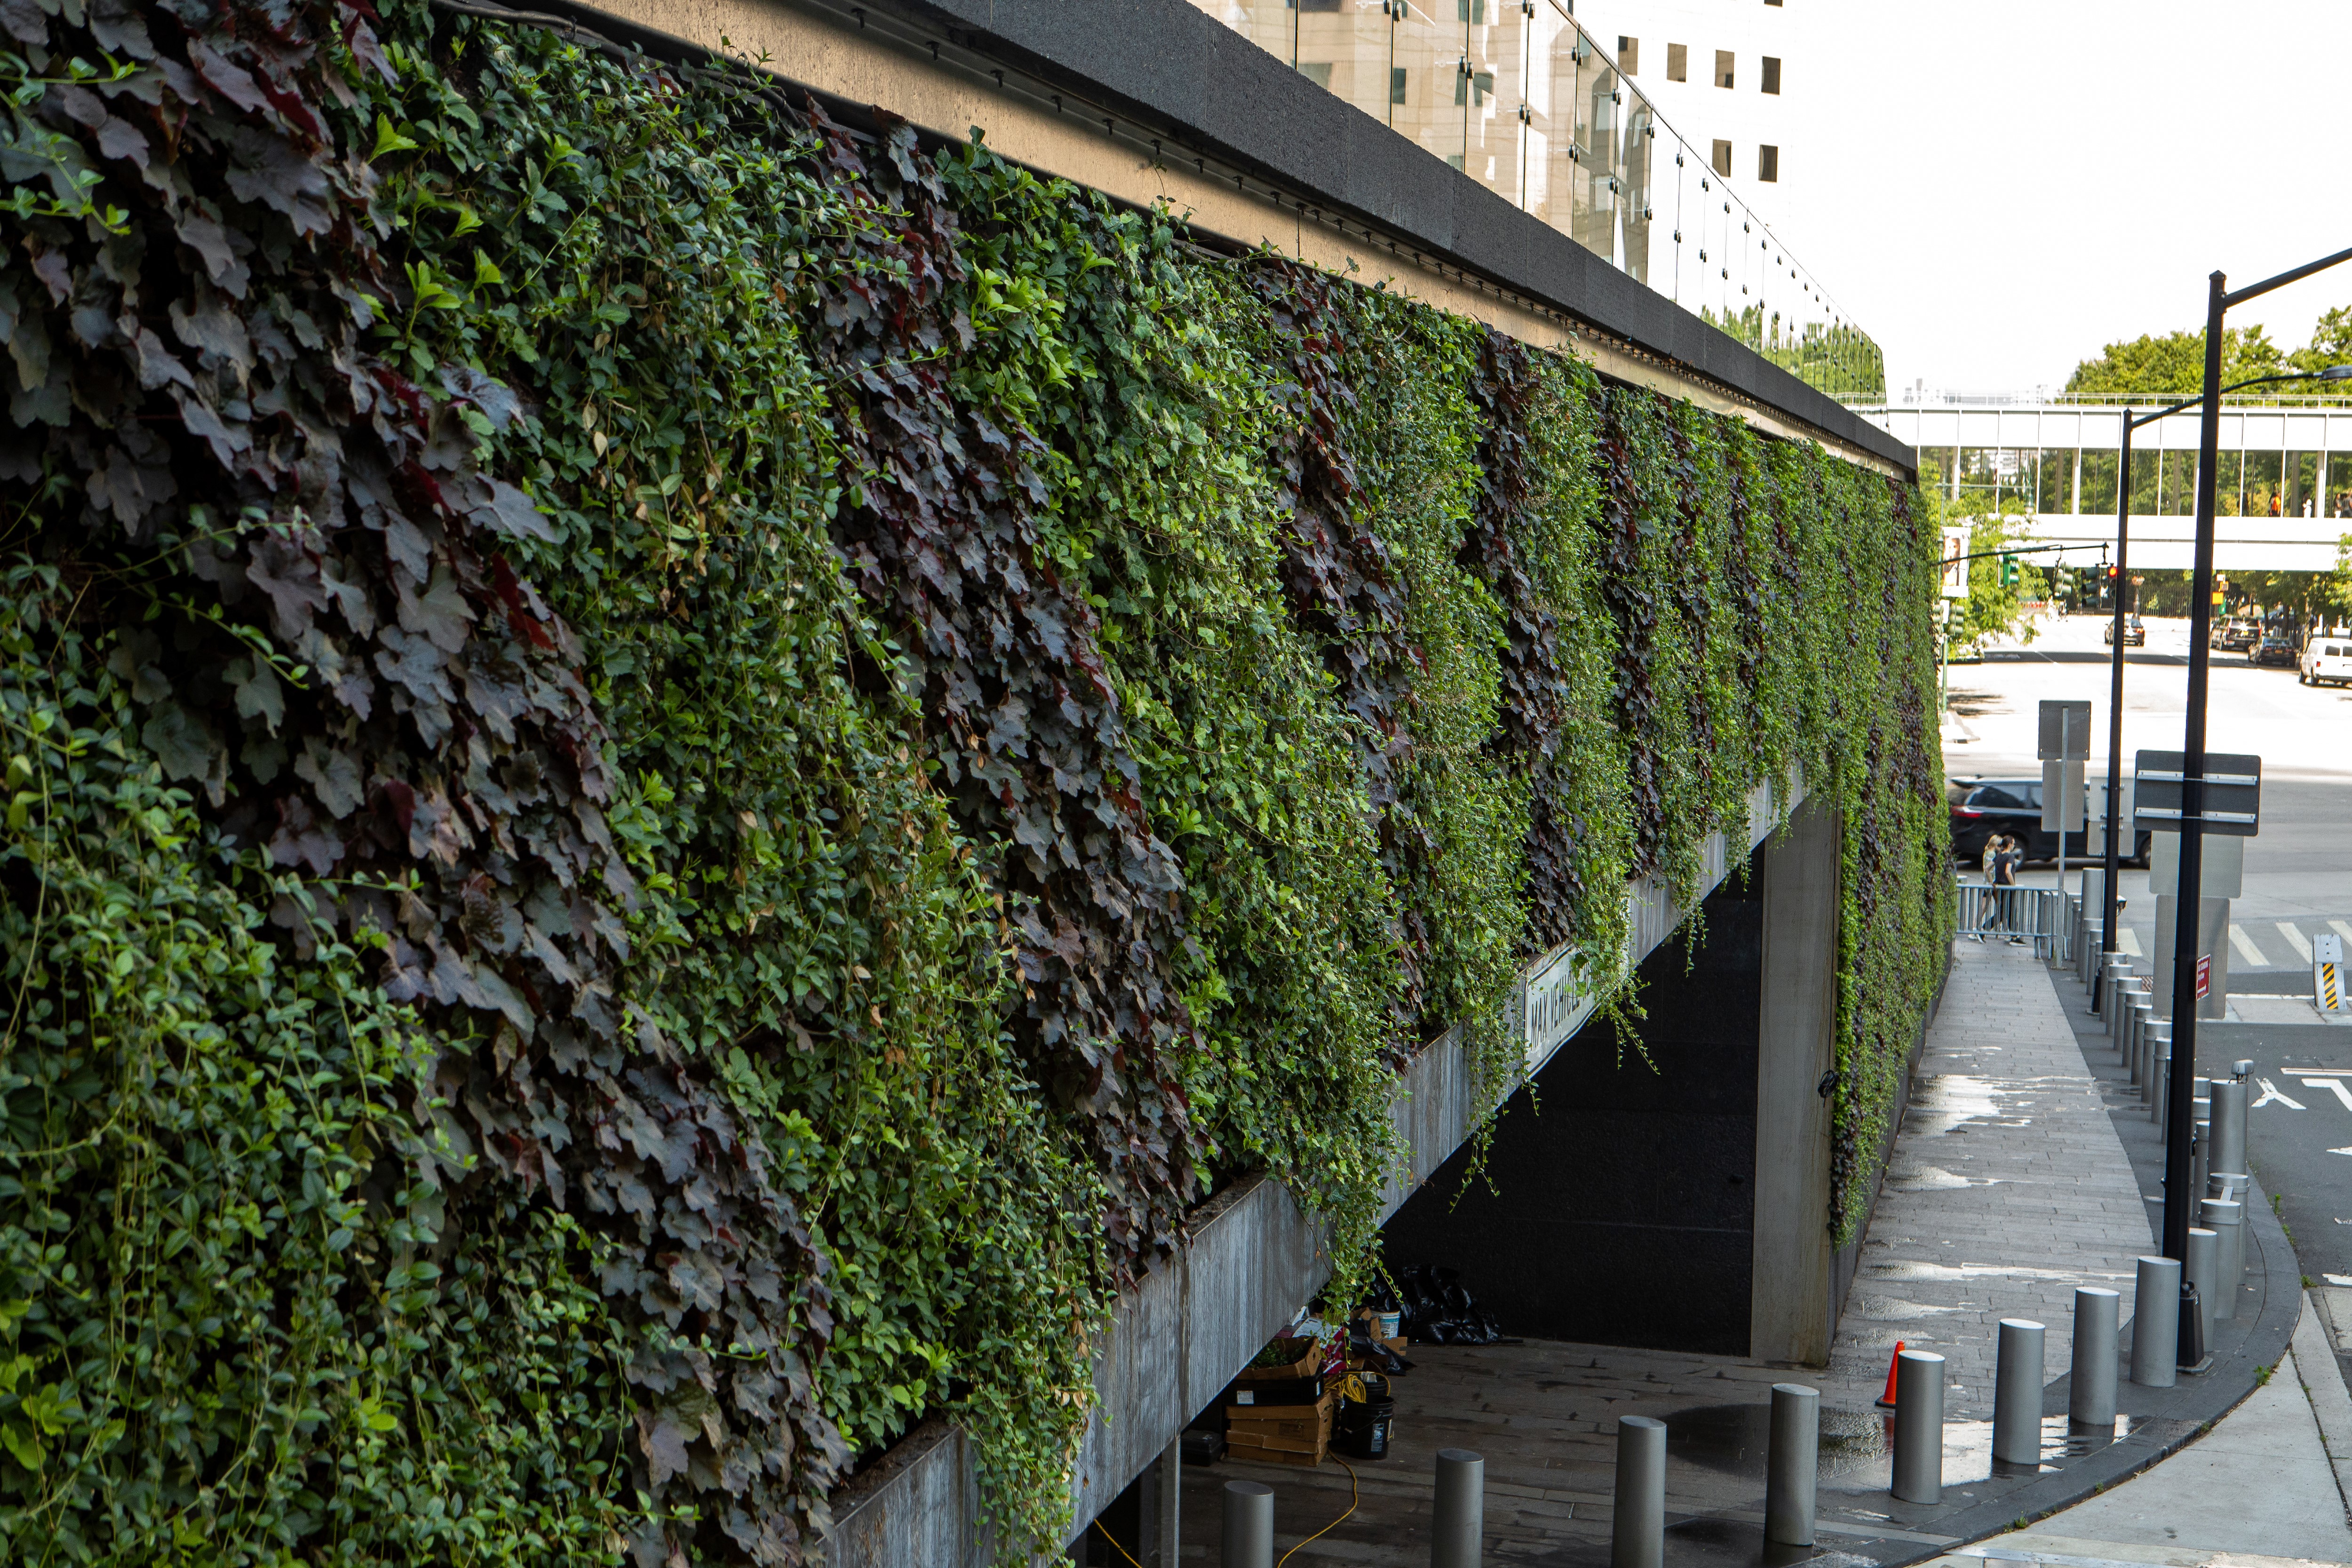 the lush foliage of the green wall intertwines with the architecture, infusing life and serenity into the heart of the city.